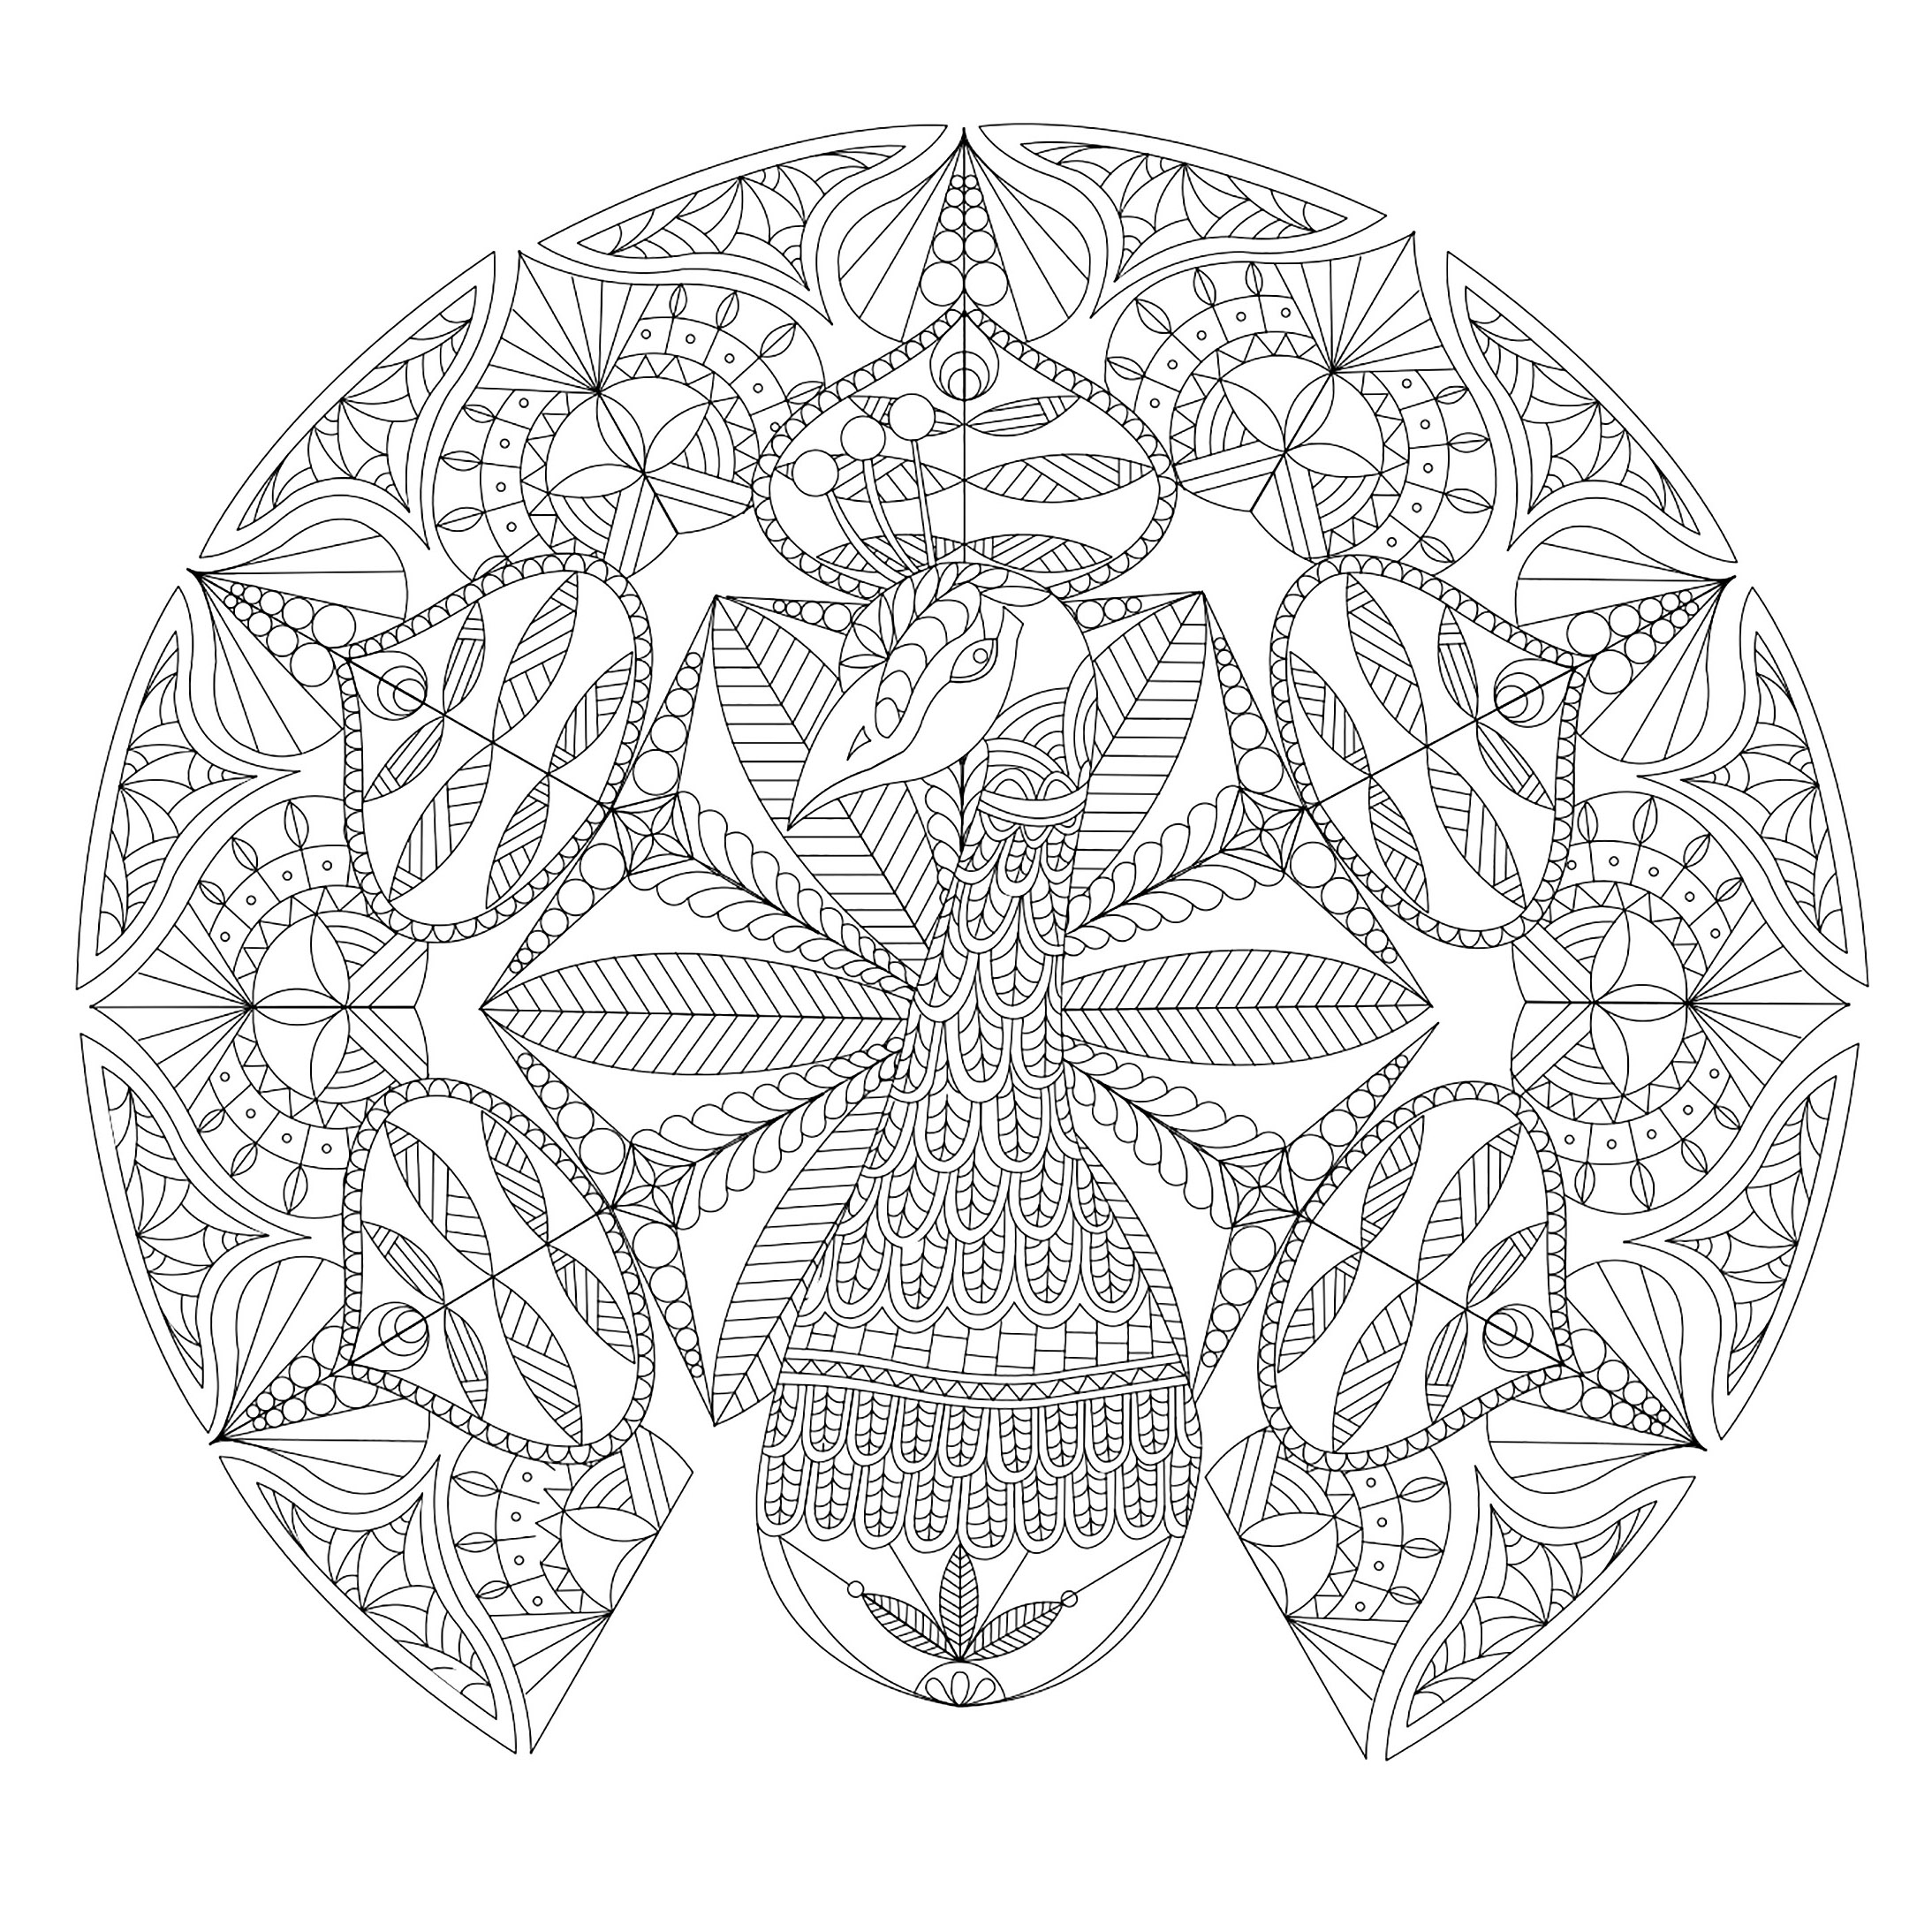 Many coloring patterns for this mandala whose main subject is a majestic peacock